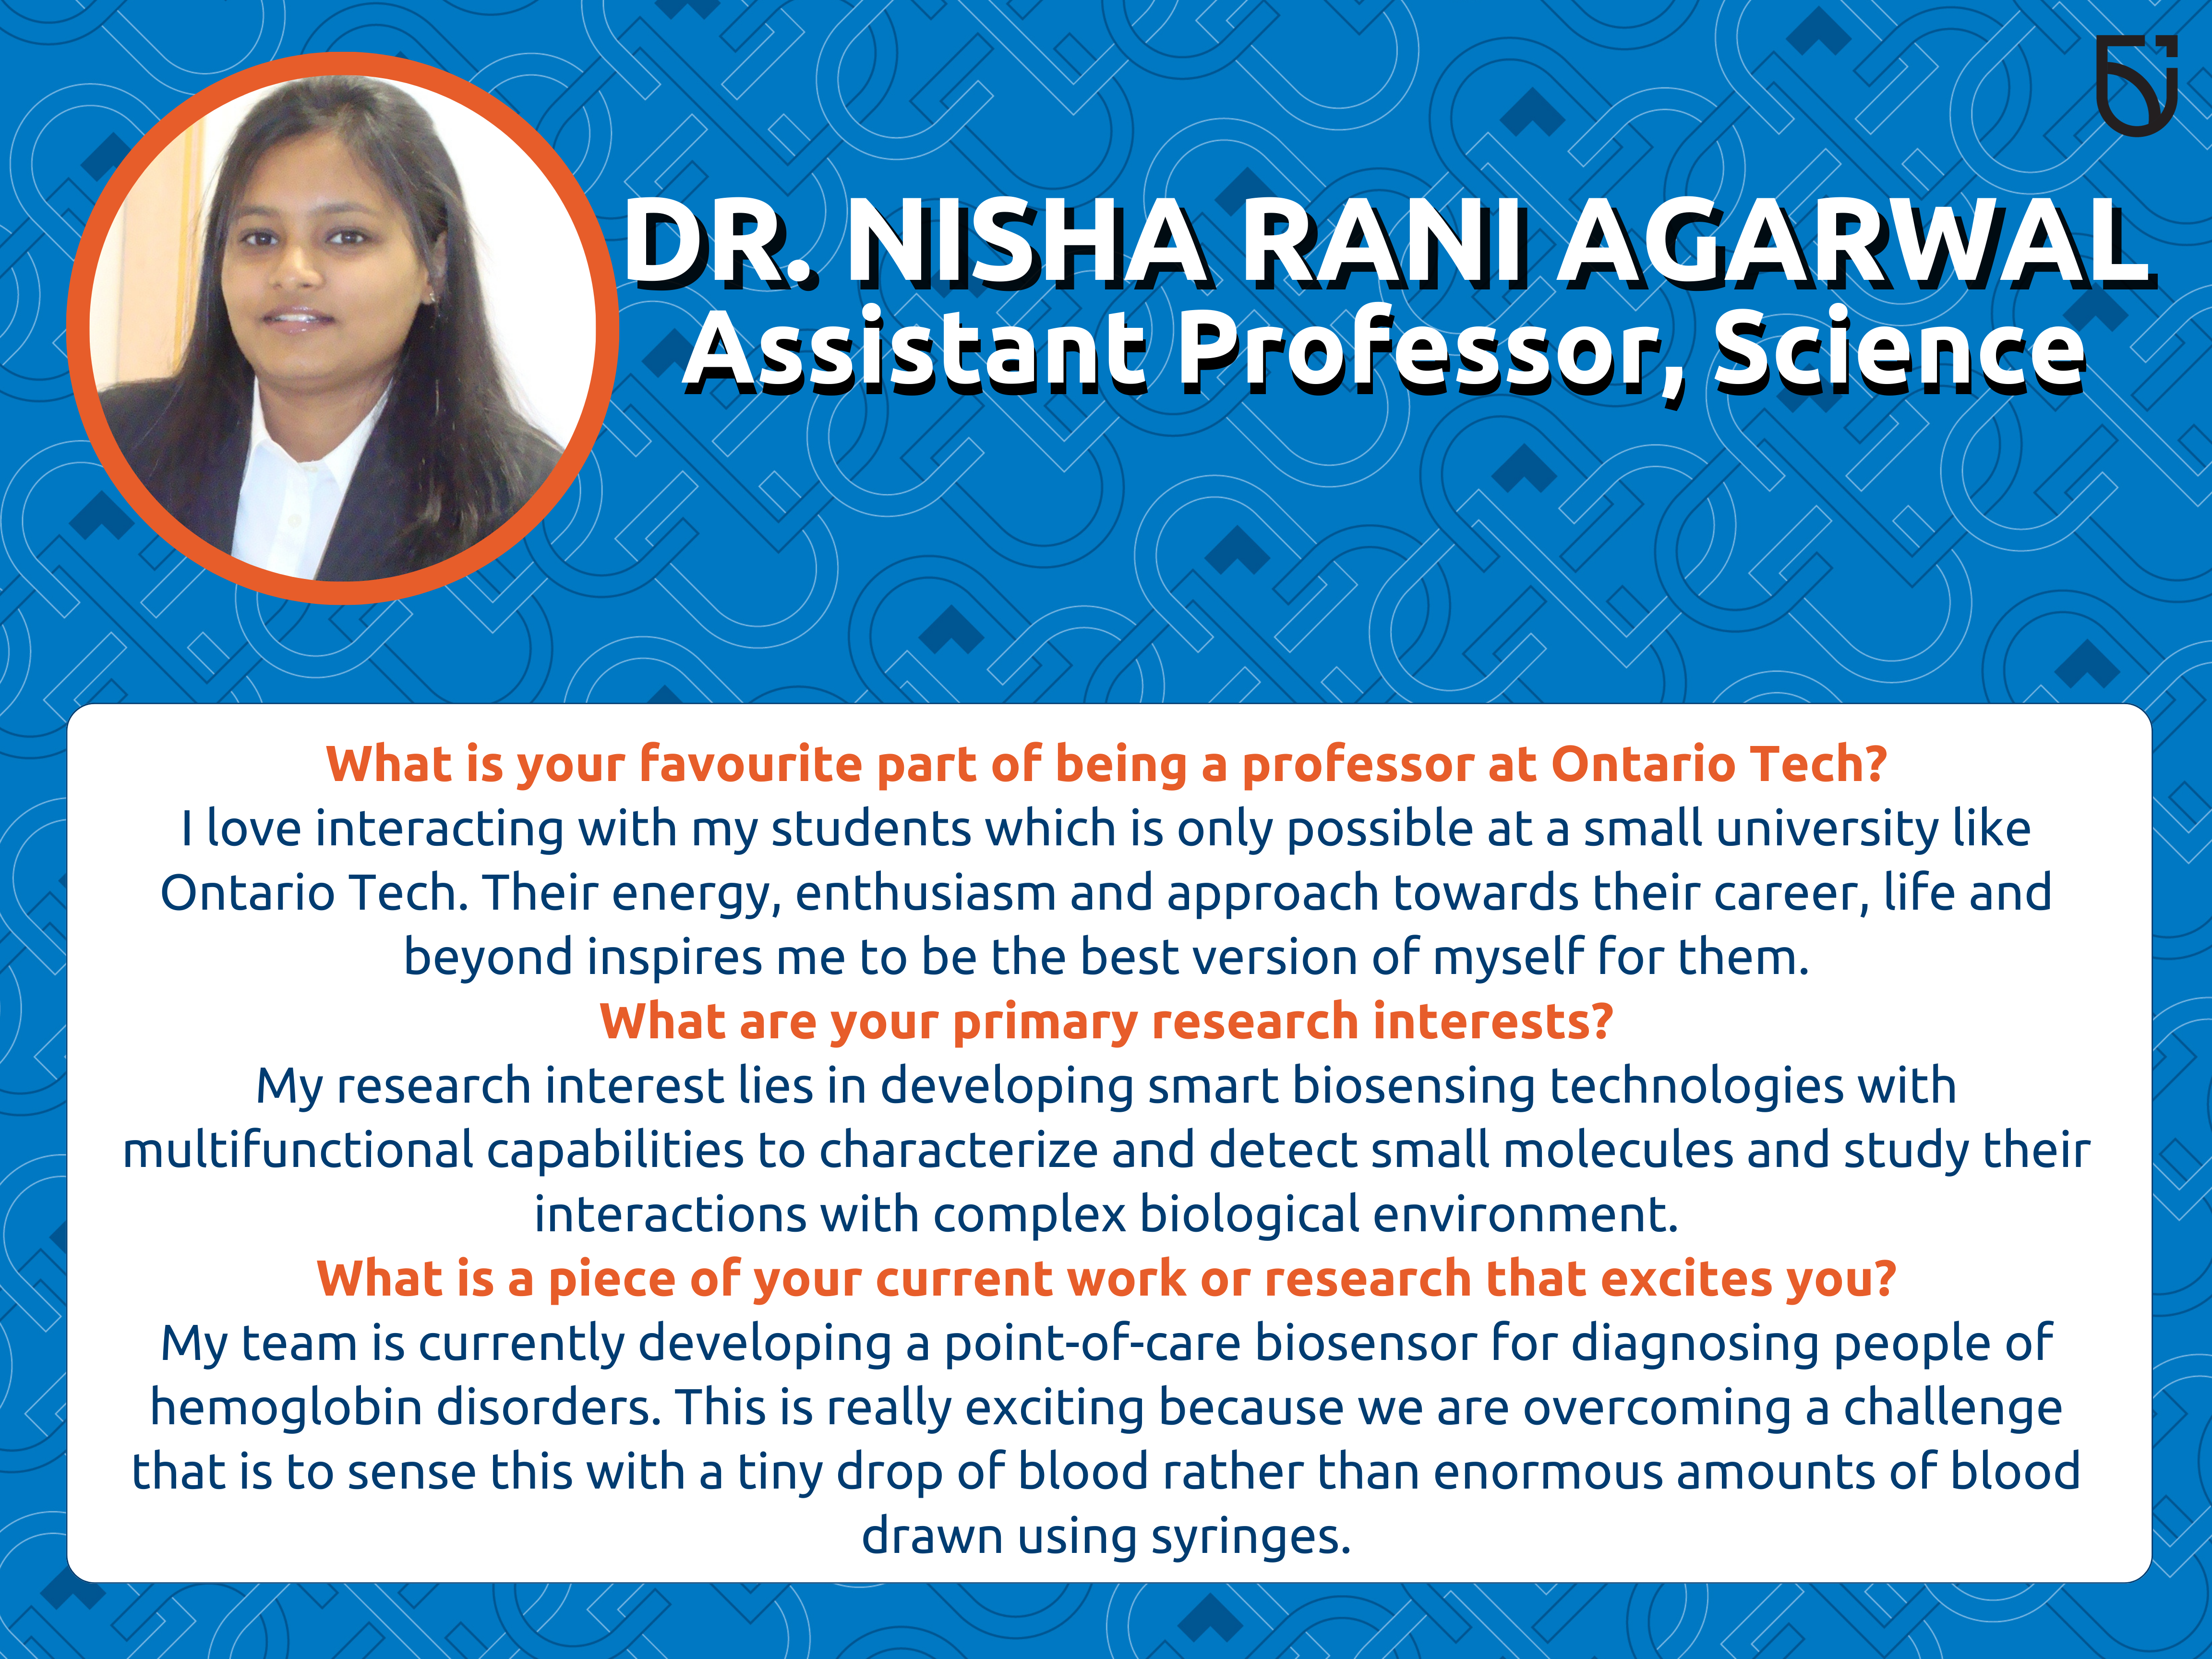 This photo is a Women’s Wednesday feature of Dr. Agarwal, an Assistant Professor in the Faculty of Science